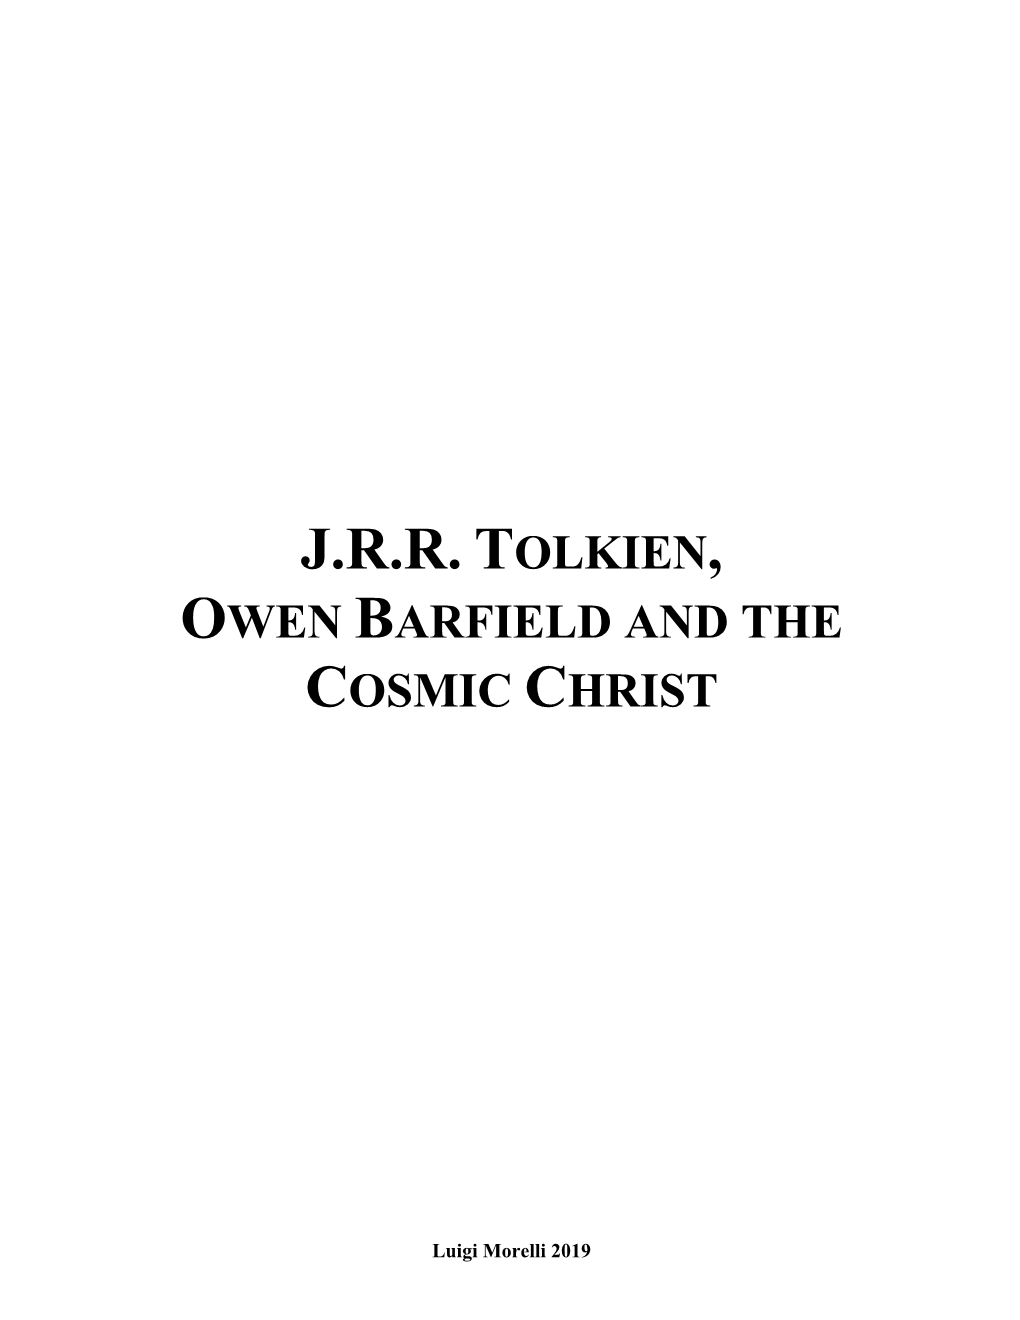 J.R.R. Tolkien, Owen Barfield and the Cosmic Christ